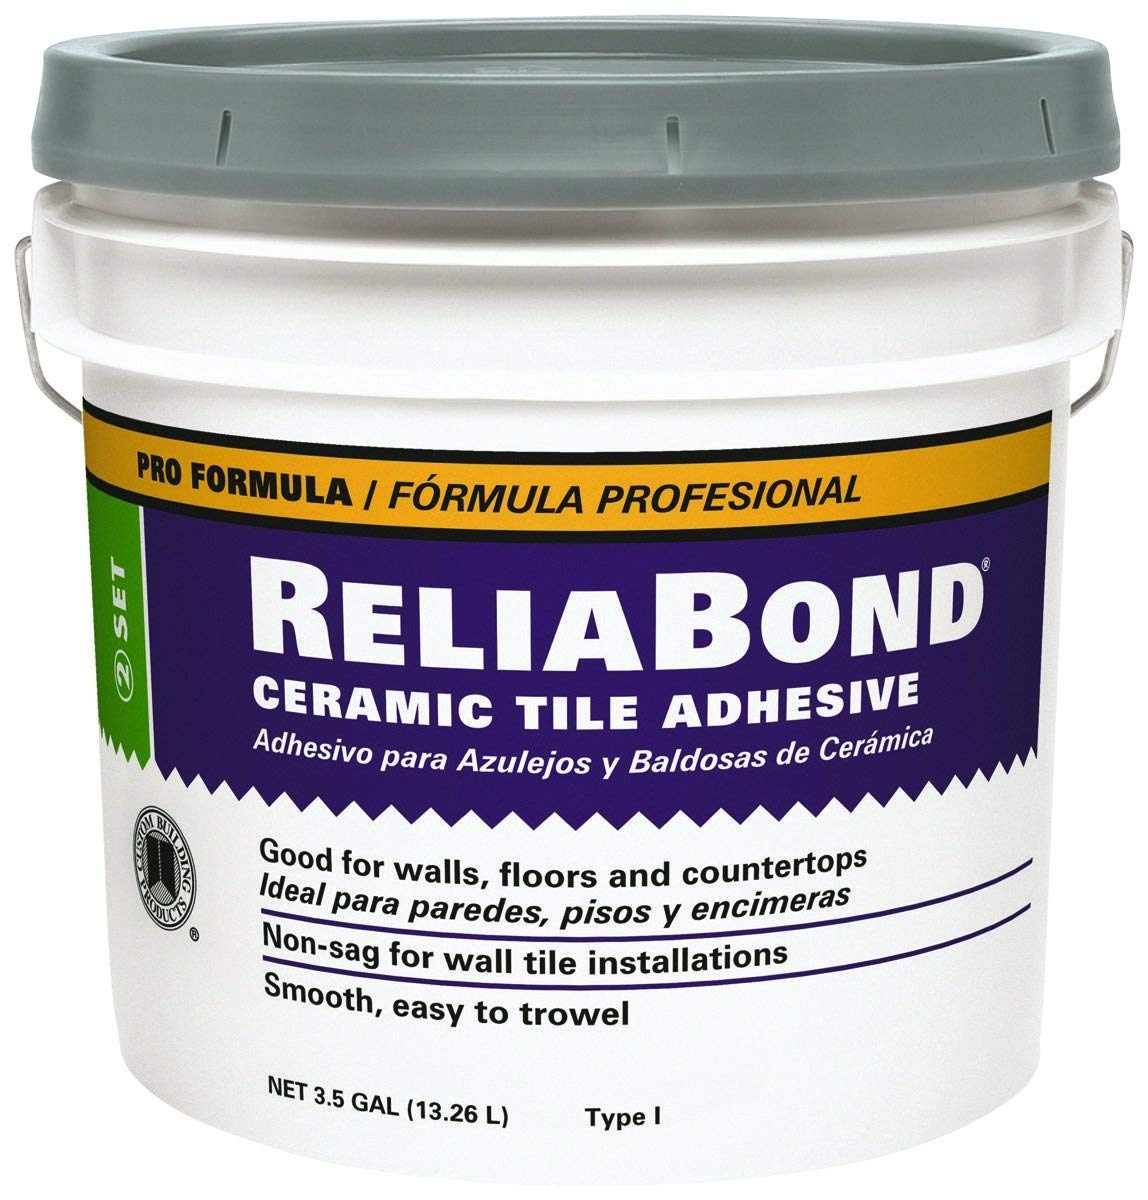 RELIABOND 6P CERAMIC TILE ADHESIVE 3.5G (COVER 175SF USAGE: ONLY FOR WALL TILE)  $50/BUCKET (in stock 1 p)